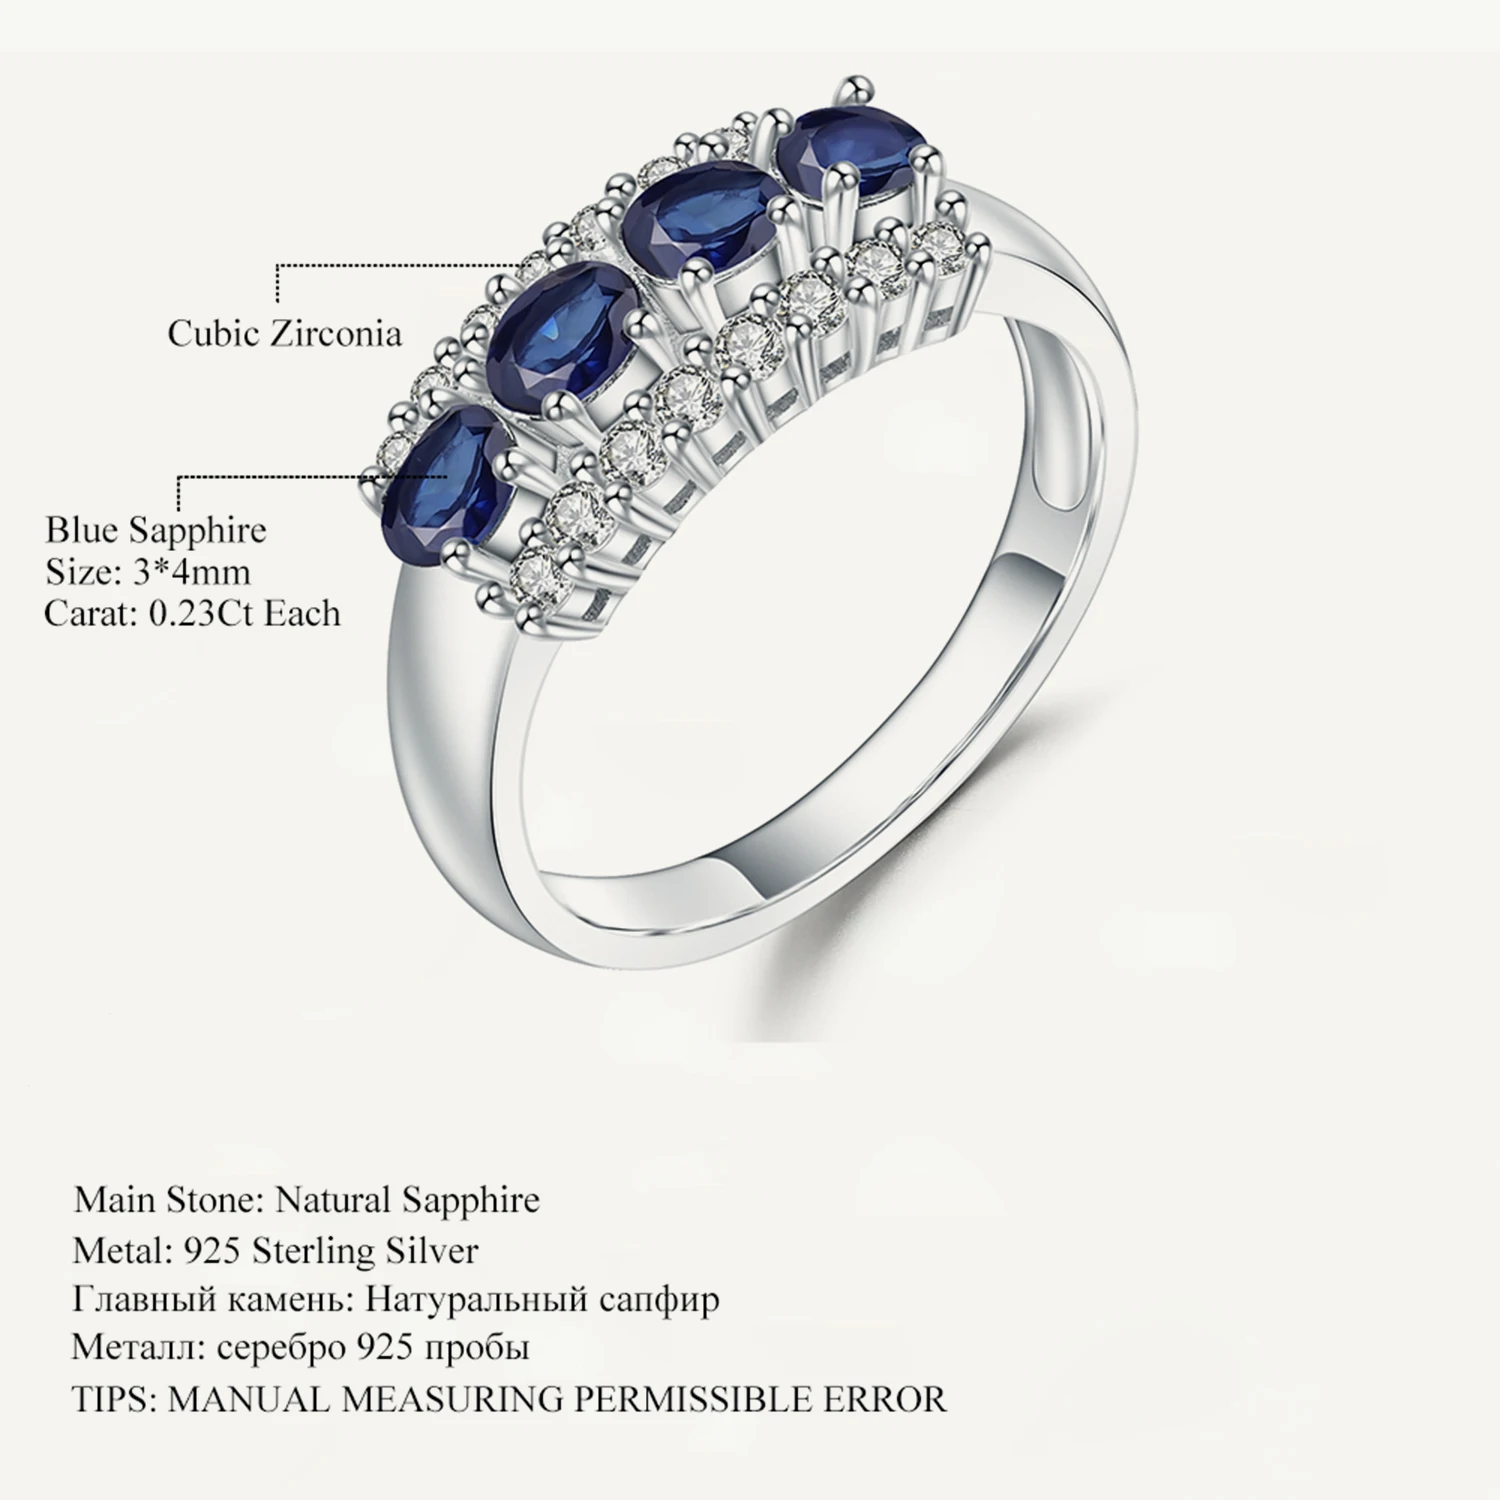 GEM'S BALLET 0.92Ct Natural Vintage Blue Sapphire Ring 925 Sterling Silver Wedding Rings For Women Valentine's Day Jewelry